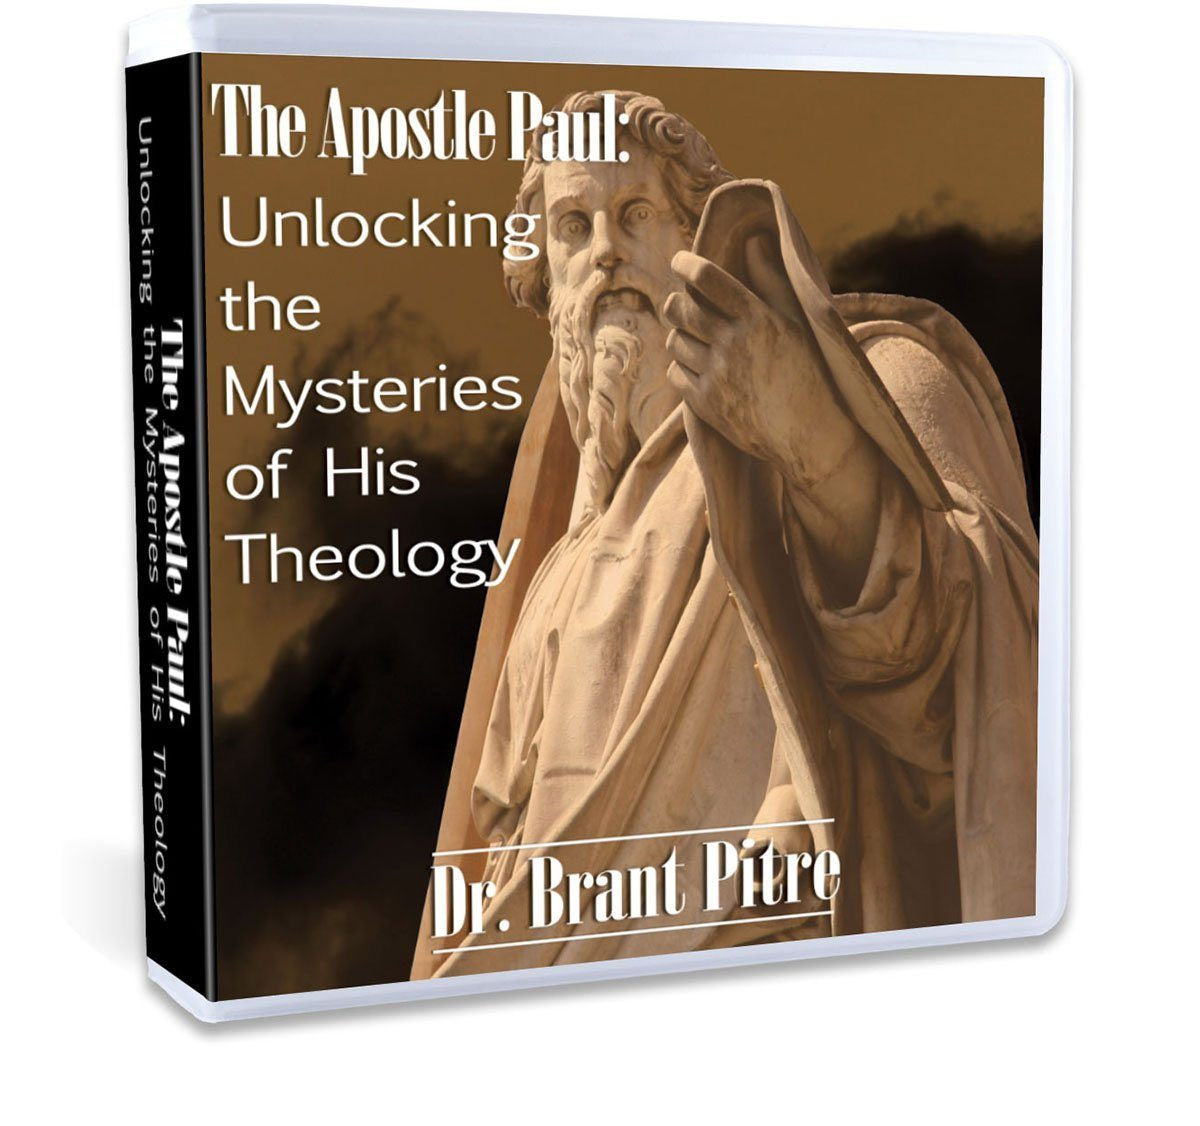 In this extensive Bible study on Paul's theology with Dr. Brant Pitre, you will cover topics such as the Mystery of the Law, the theology of the Body, the Mystery of Sin and Redemption, the End of Time and even St. Paul's theology of the angels.